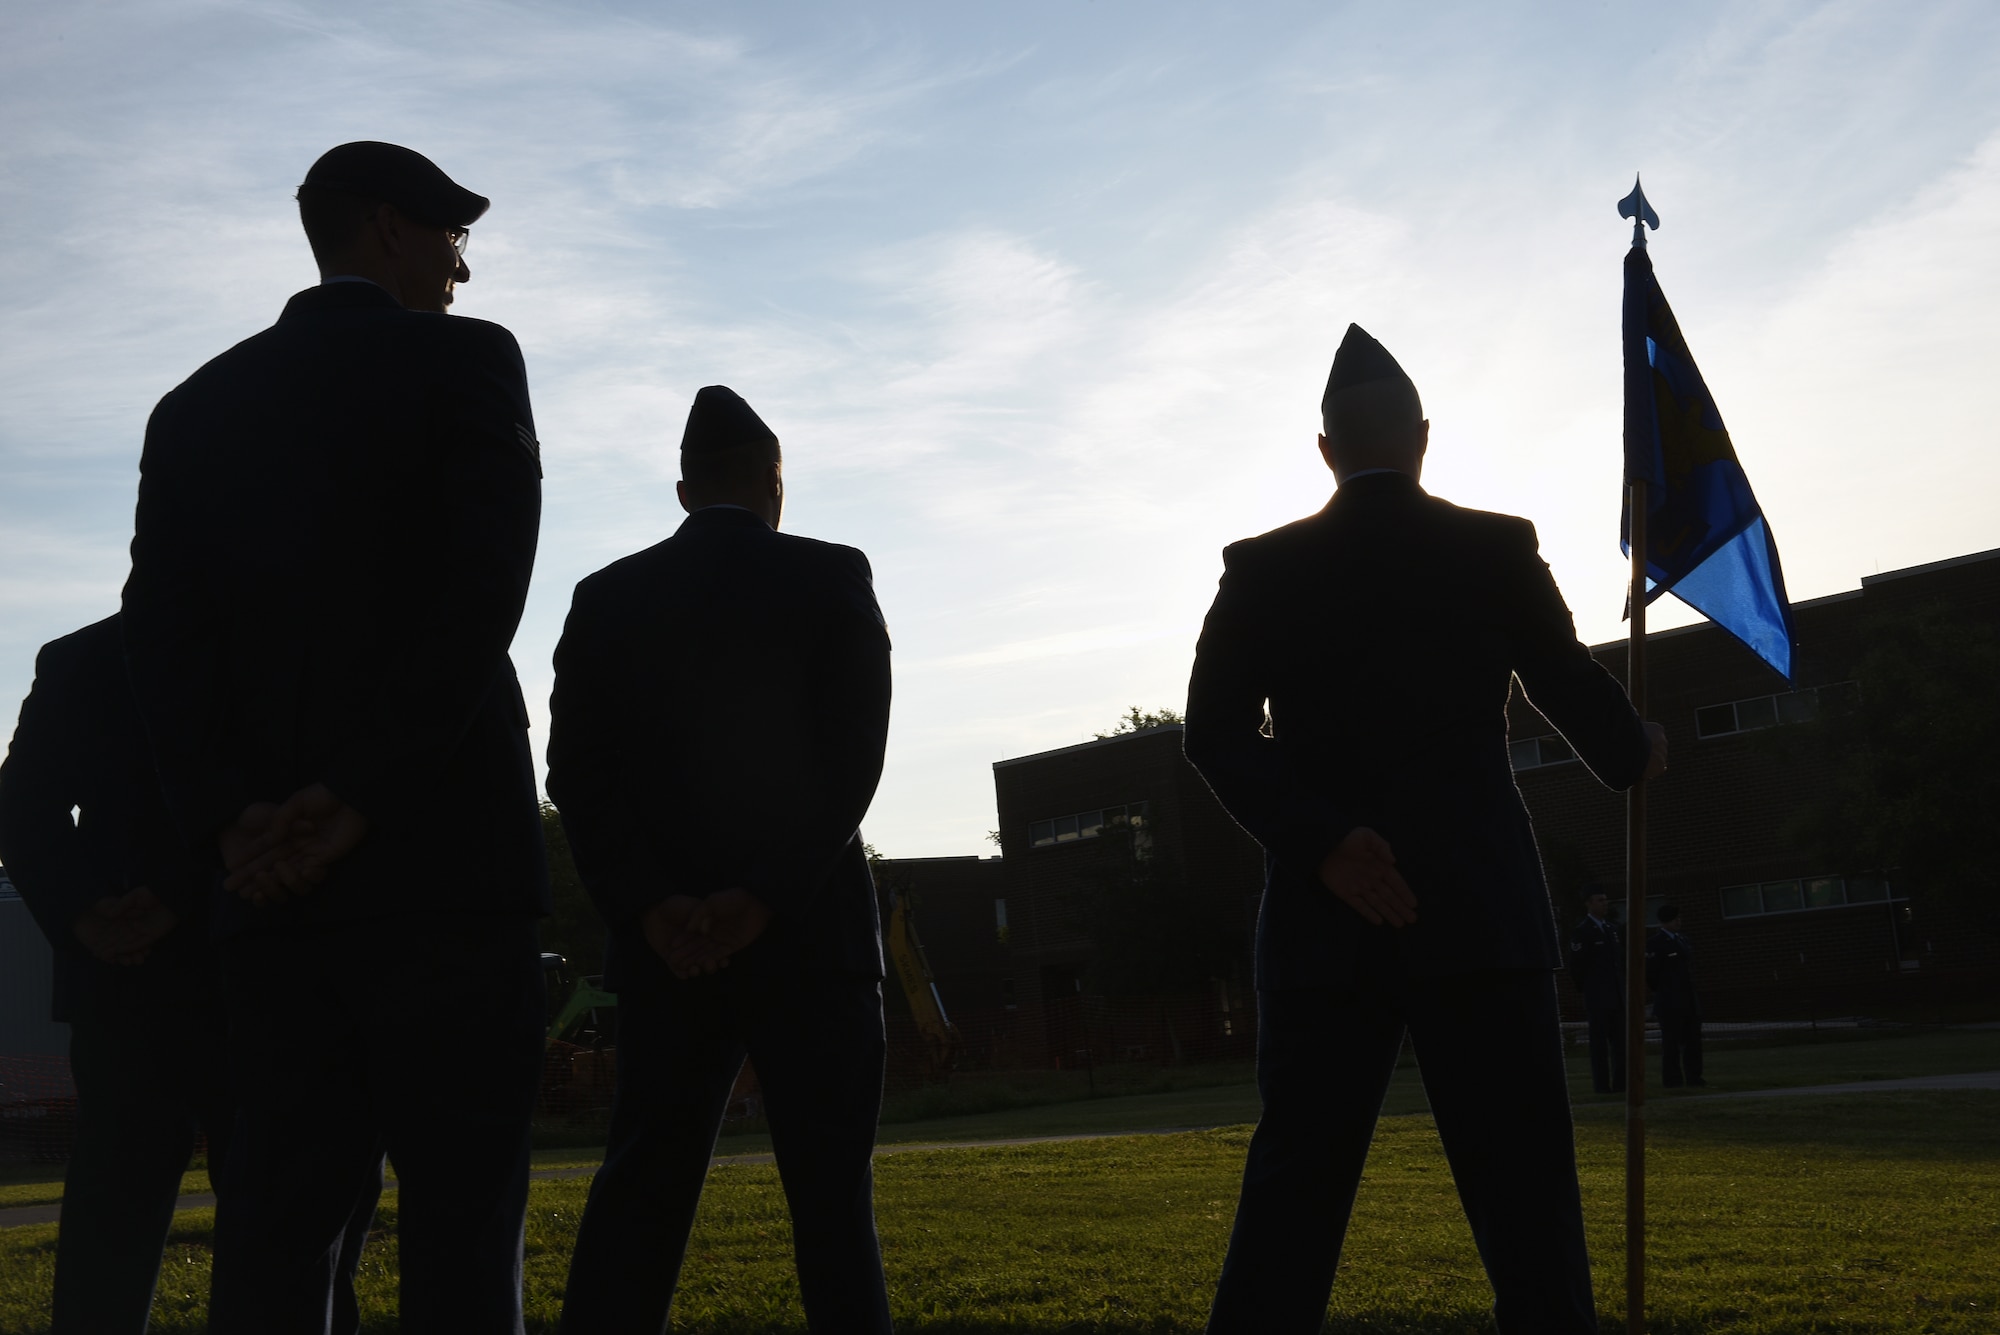 Airmen hold reveille in the sunrise during Airman leadership school at the Chief Master Sergeant Paul H. Lankford Enlisted Professional Military Education Center, June 16, 2016, on McGhee Tyson Air National Guard Base in Louisville, Tenn. (U.S. Air National Guard photo by Master Sgt. Mike R. Smith/Released)